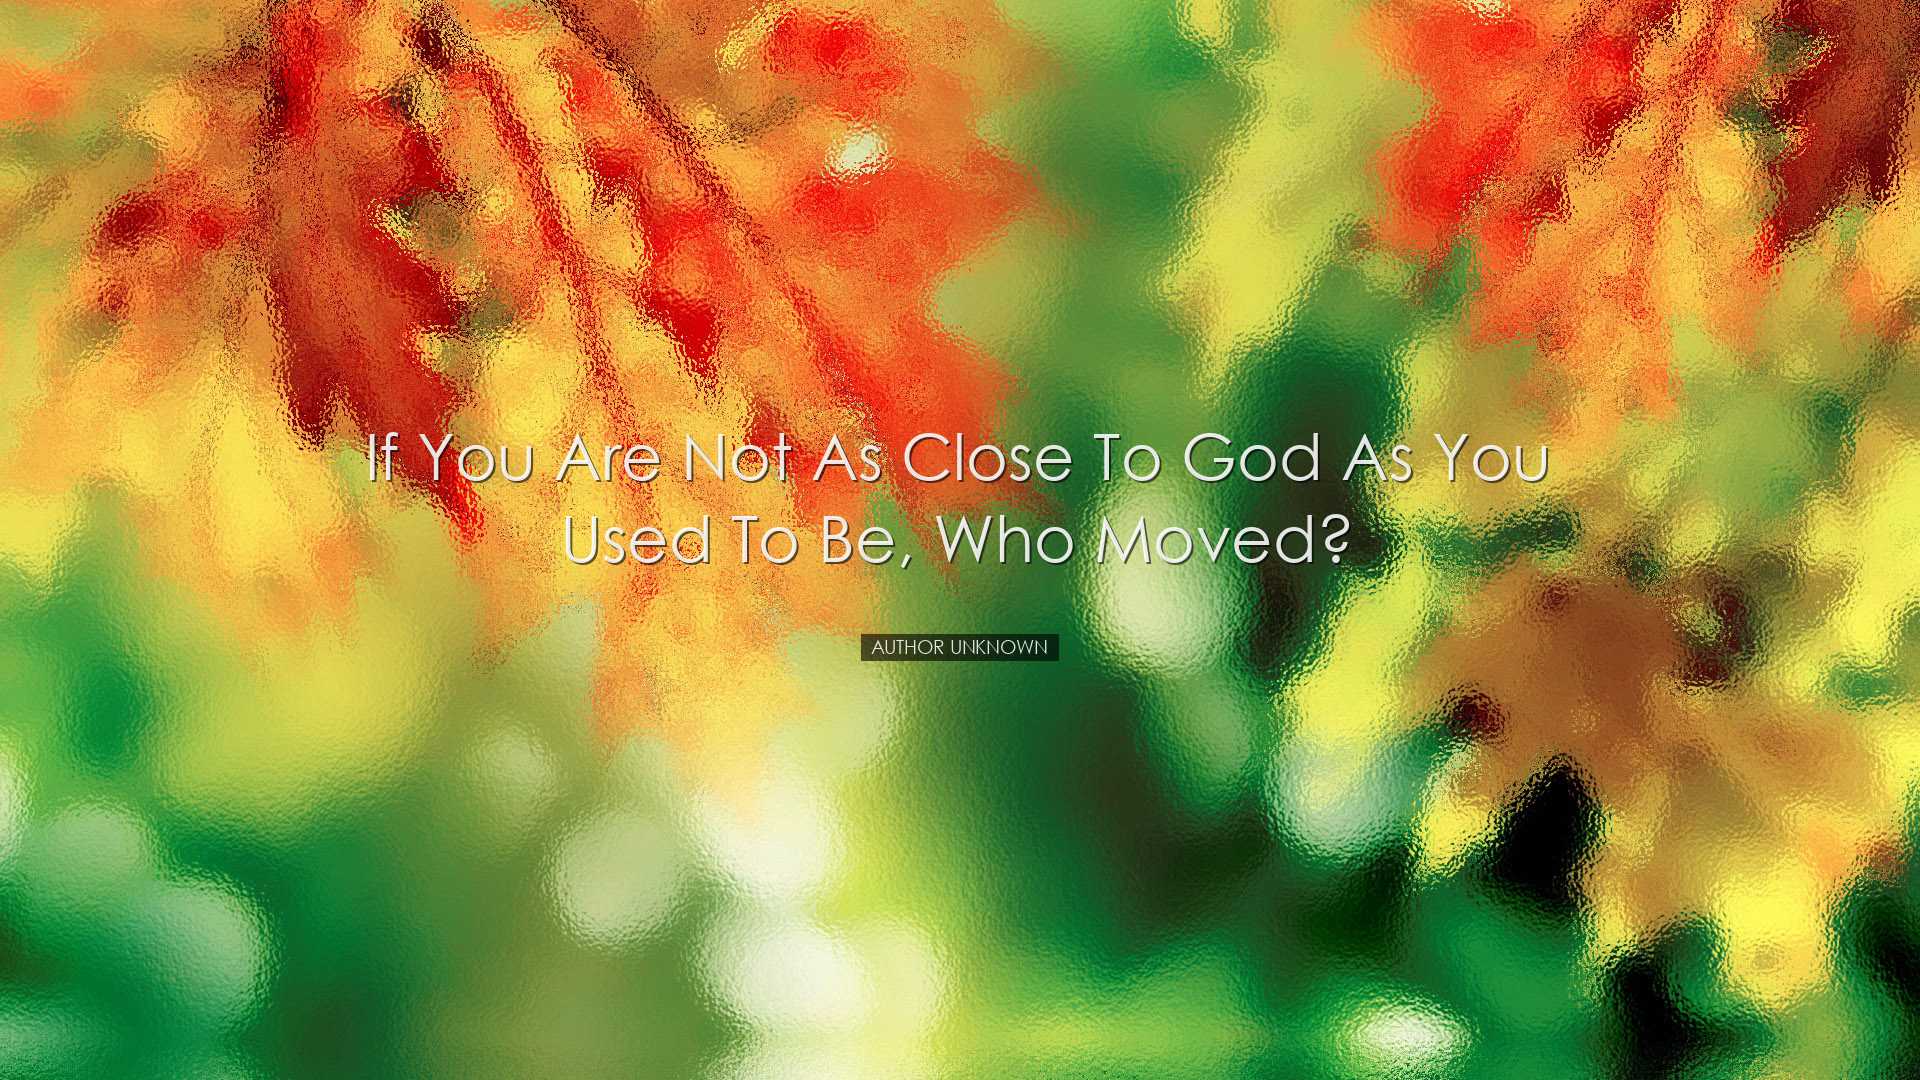 If you are not as close to God as you used to be, who moved? - Aut